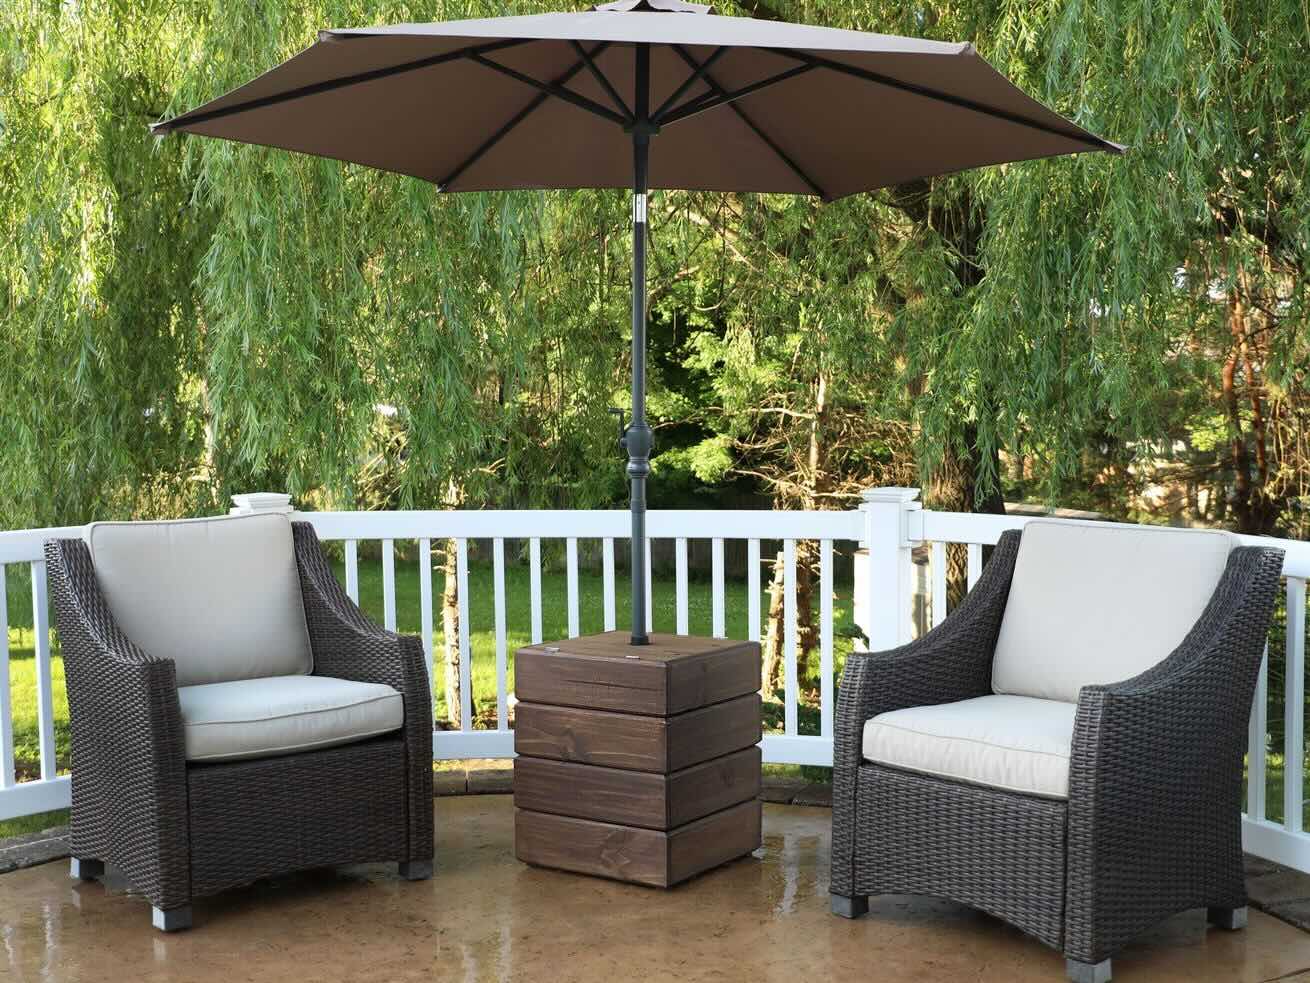 How To Build Outdoor Umbrella Stand